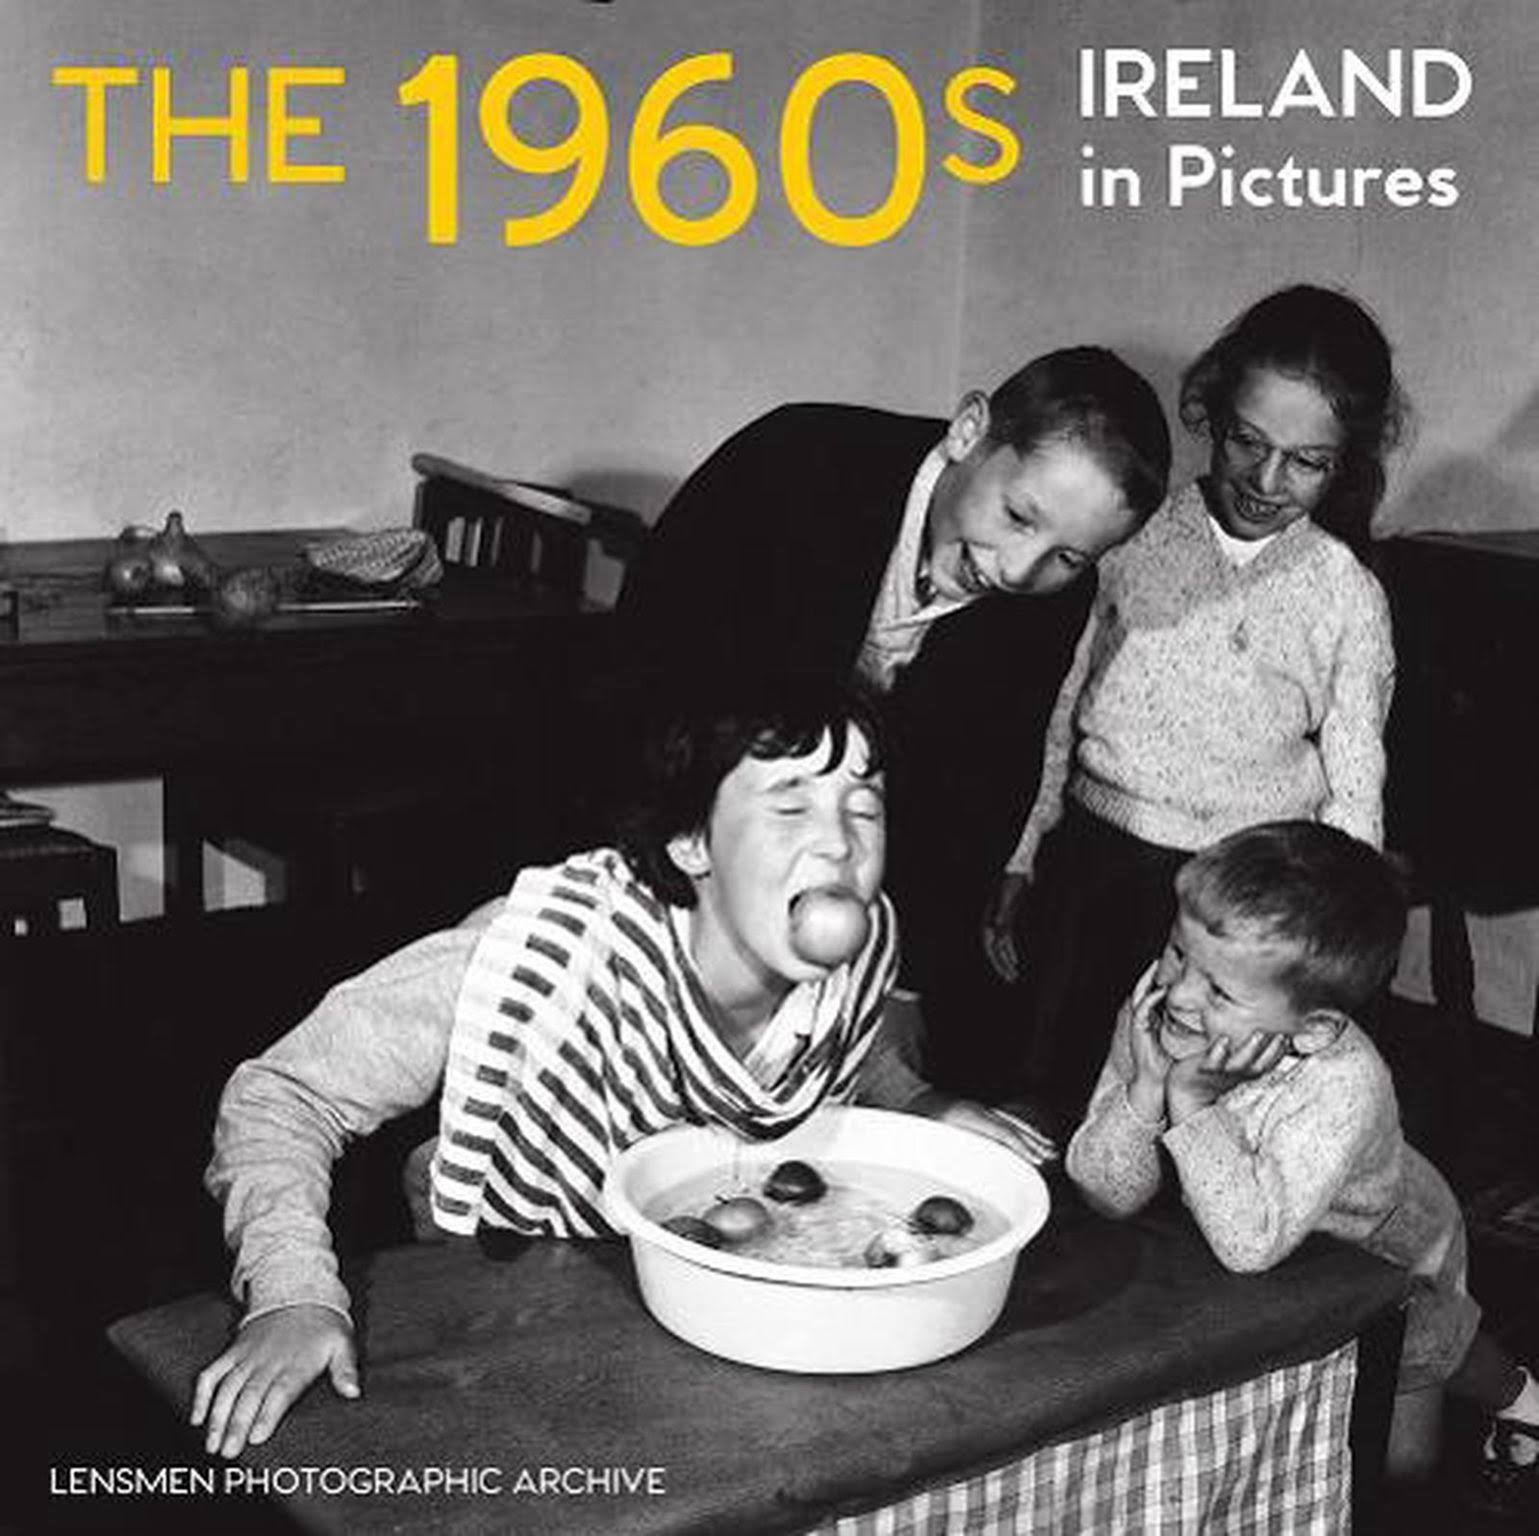 The 1960s: Ireland in Pictures [Book]